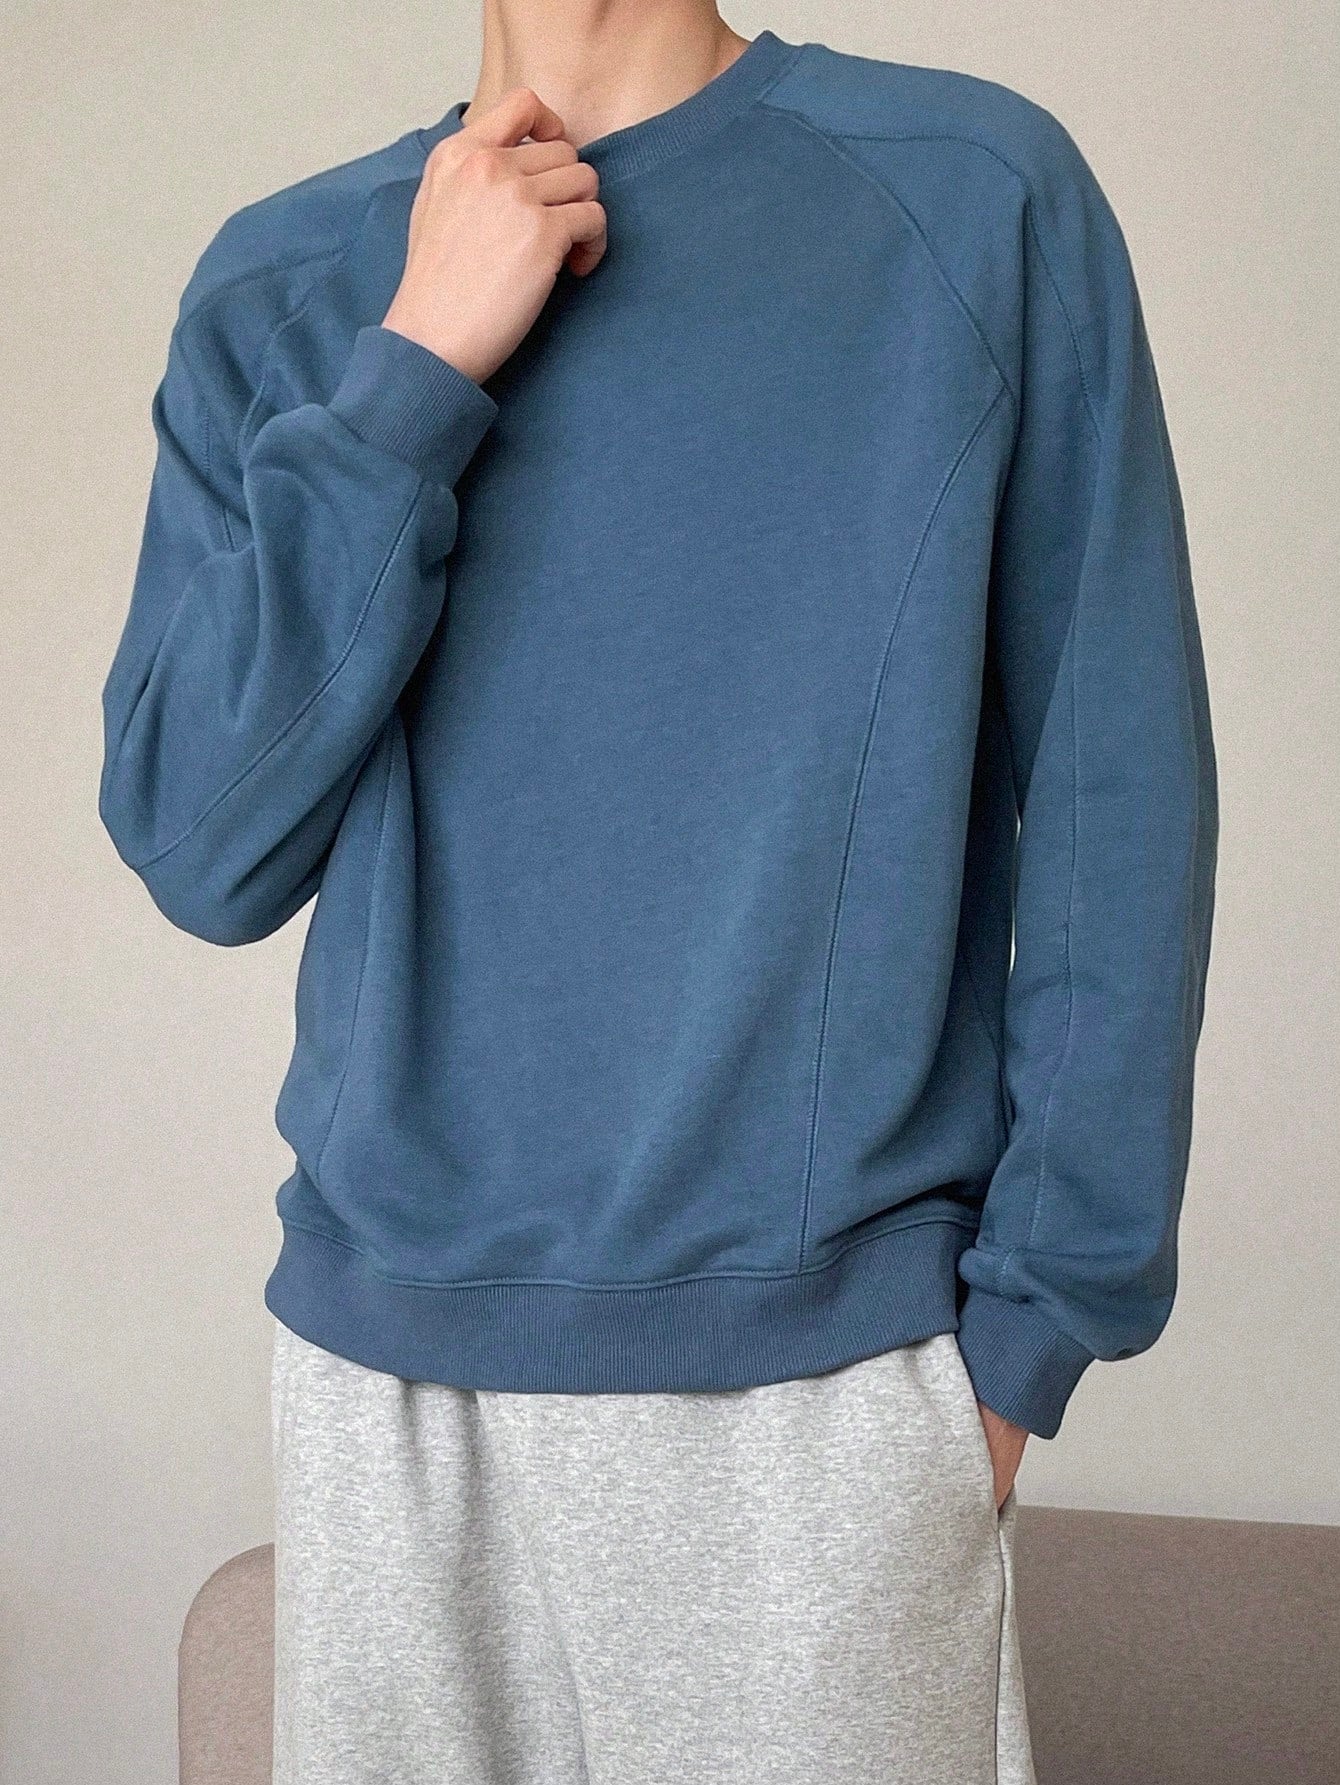 Men's Solid Color Round Neck Sweatshirt For Autumn And Winter